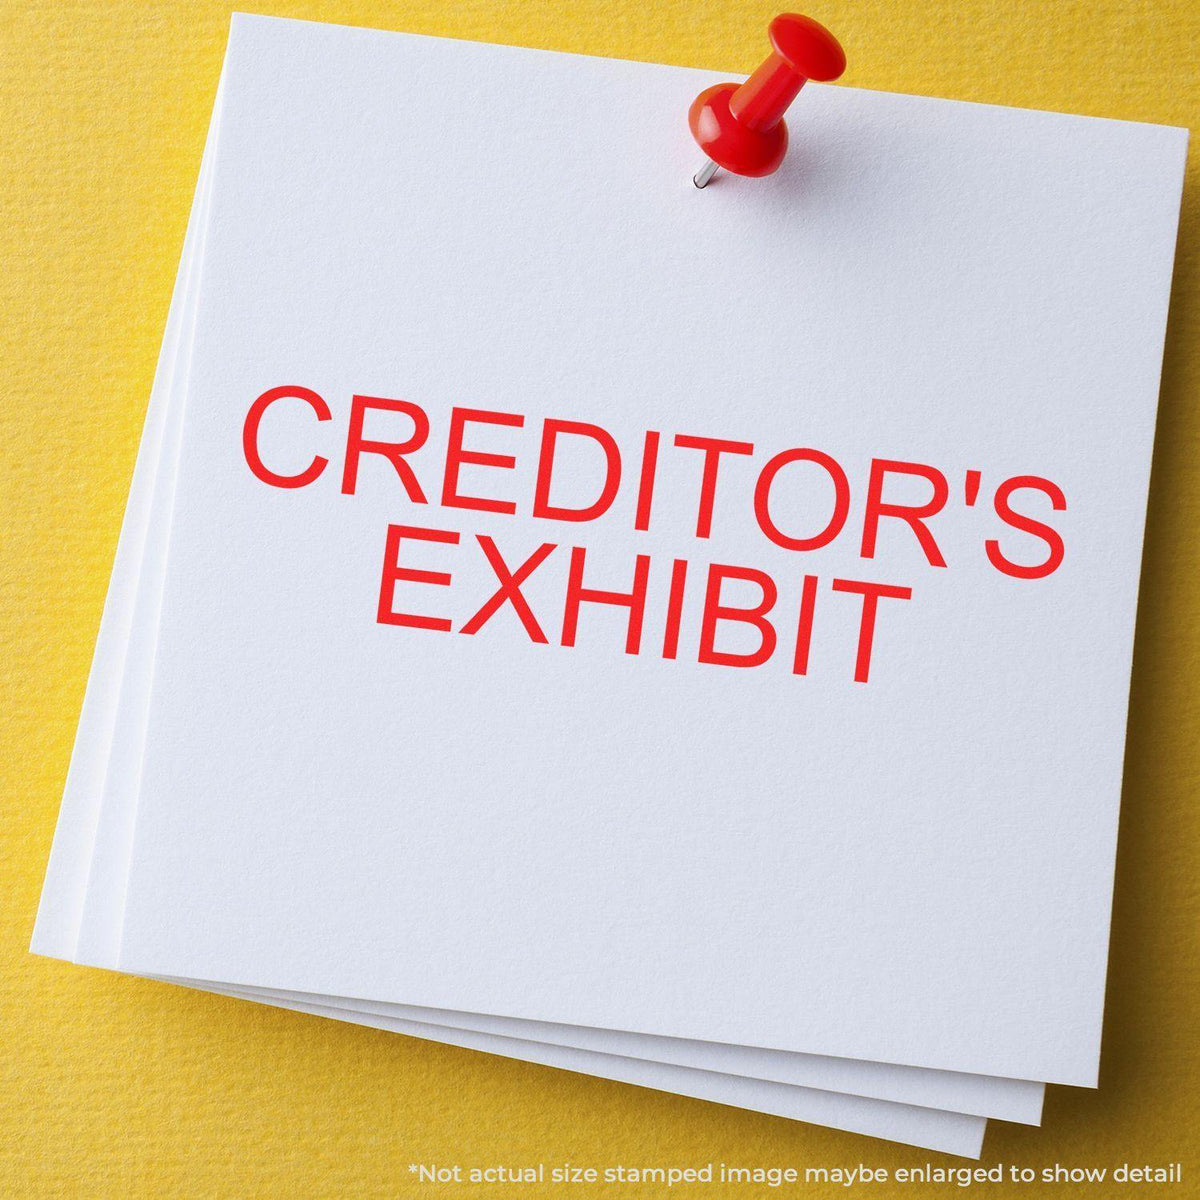 Large Creditors Exhibit Rubber Stamp In Use Photo